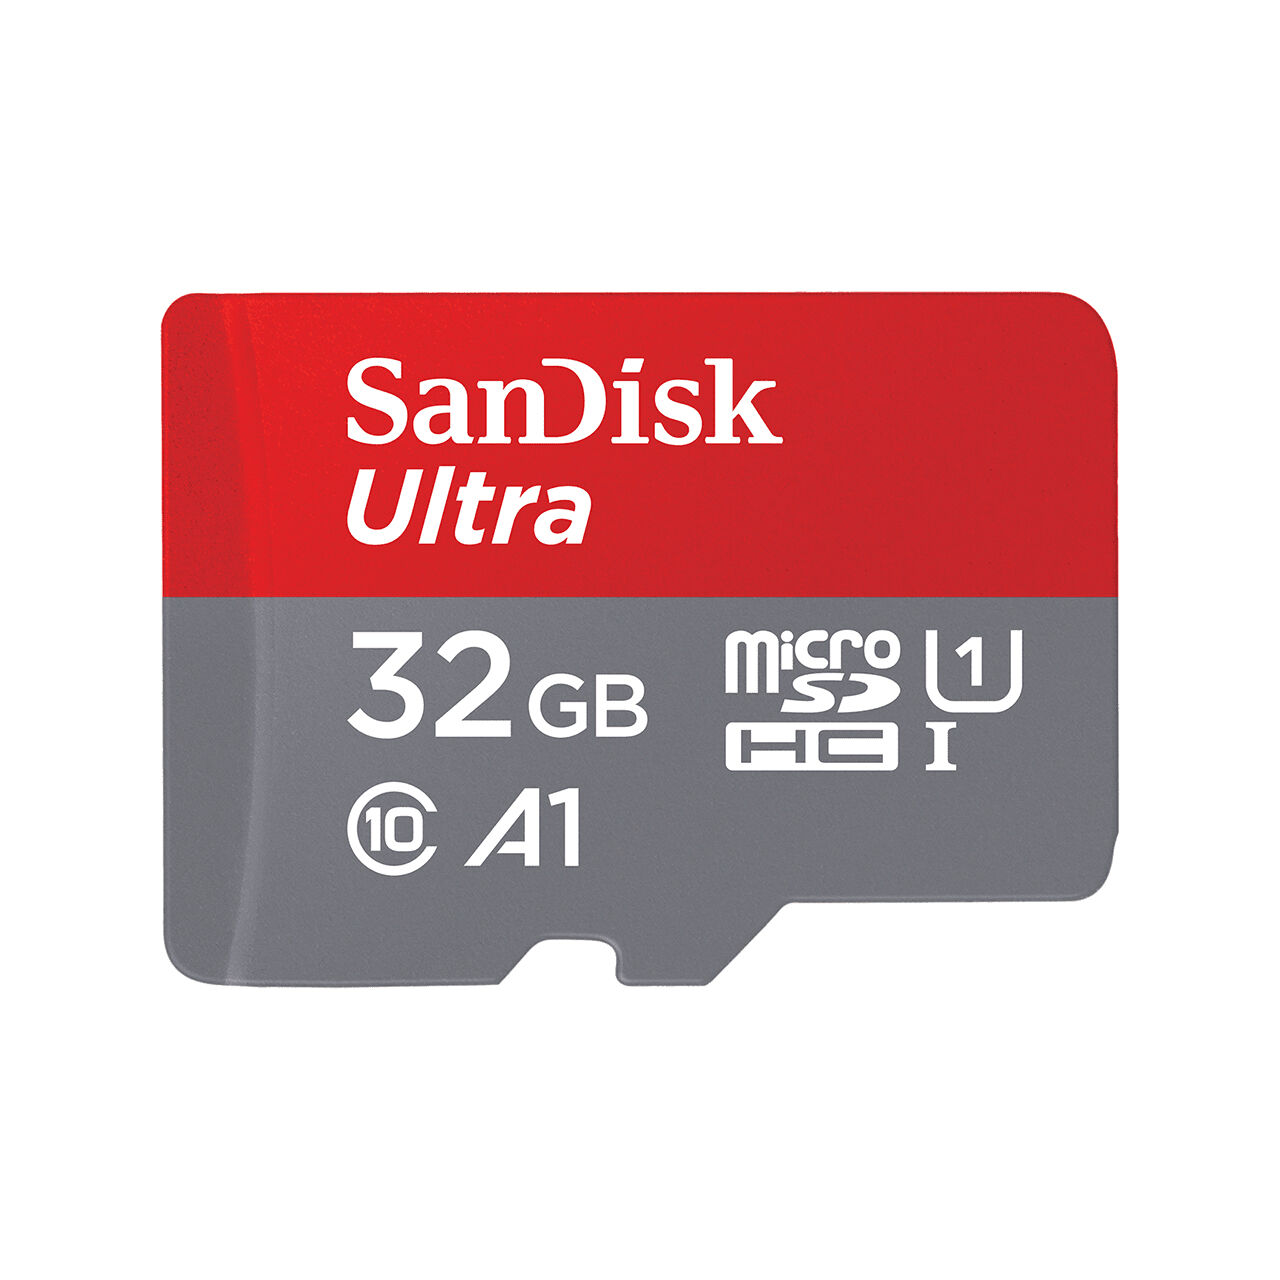 sandisk ultra microsdhc 32gb + sd adapter 100mb/s class 10 uhs-i